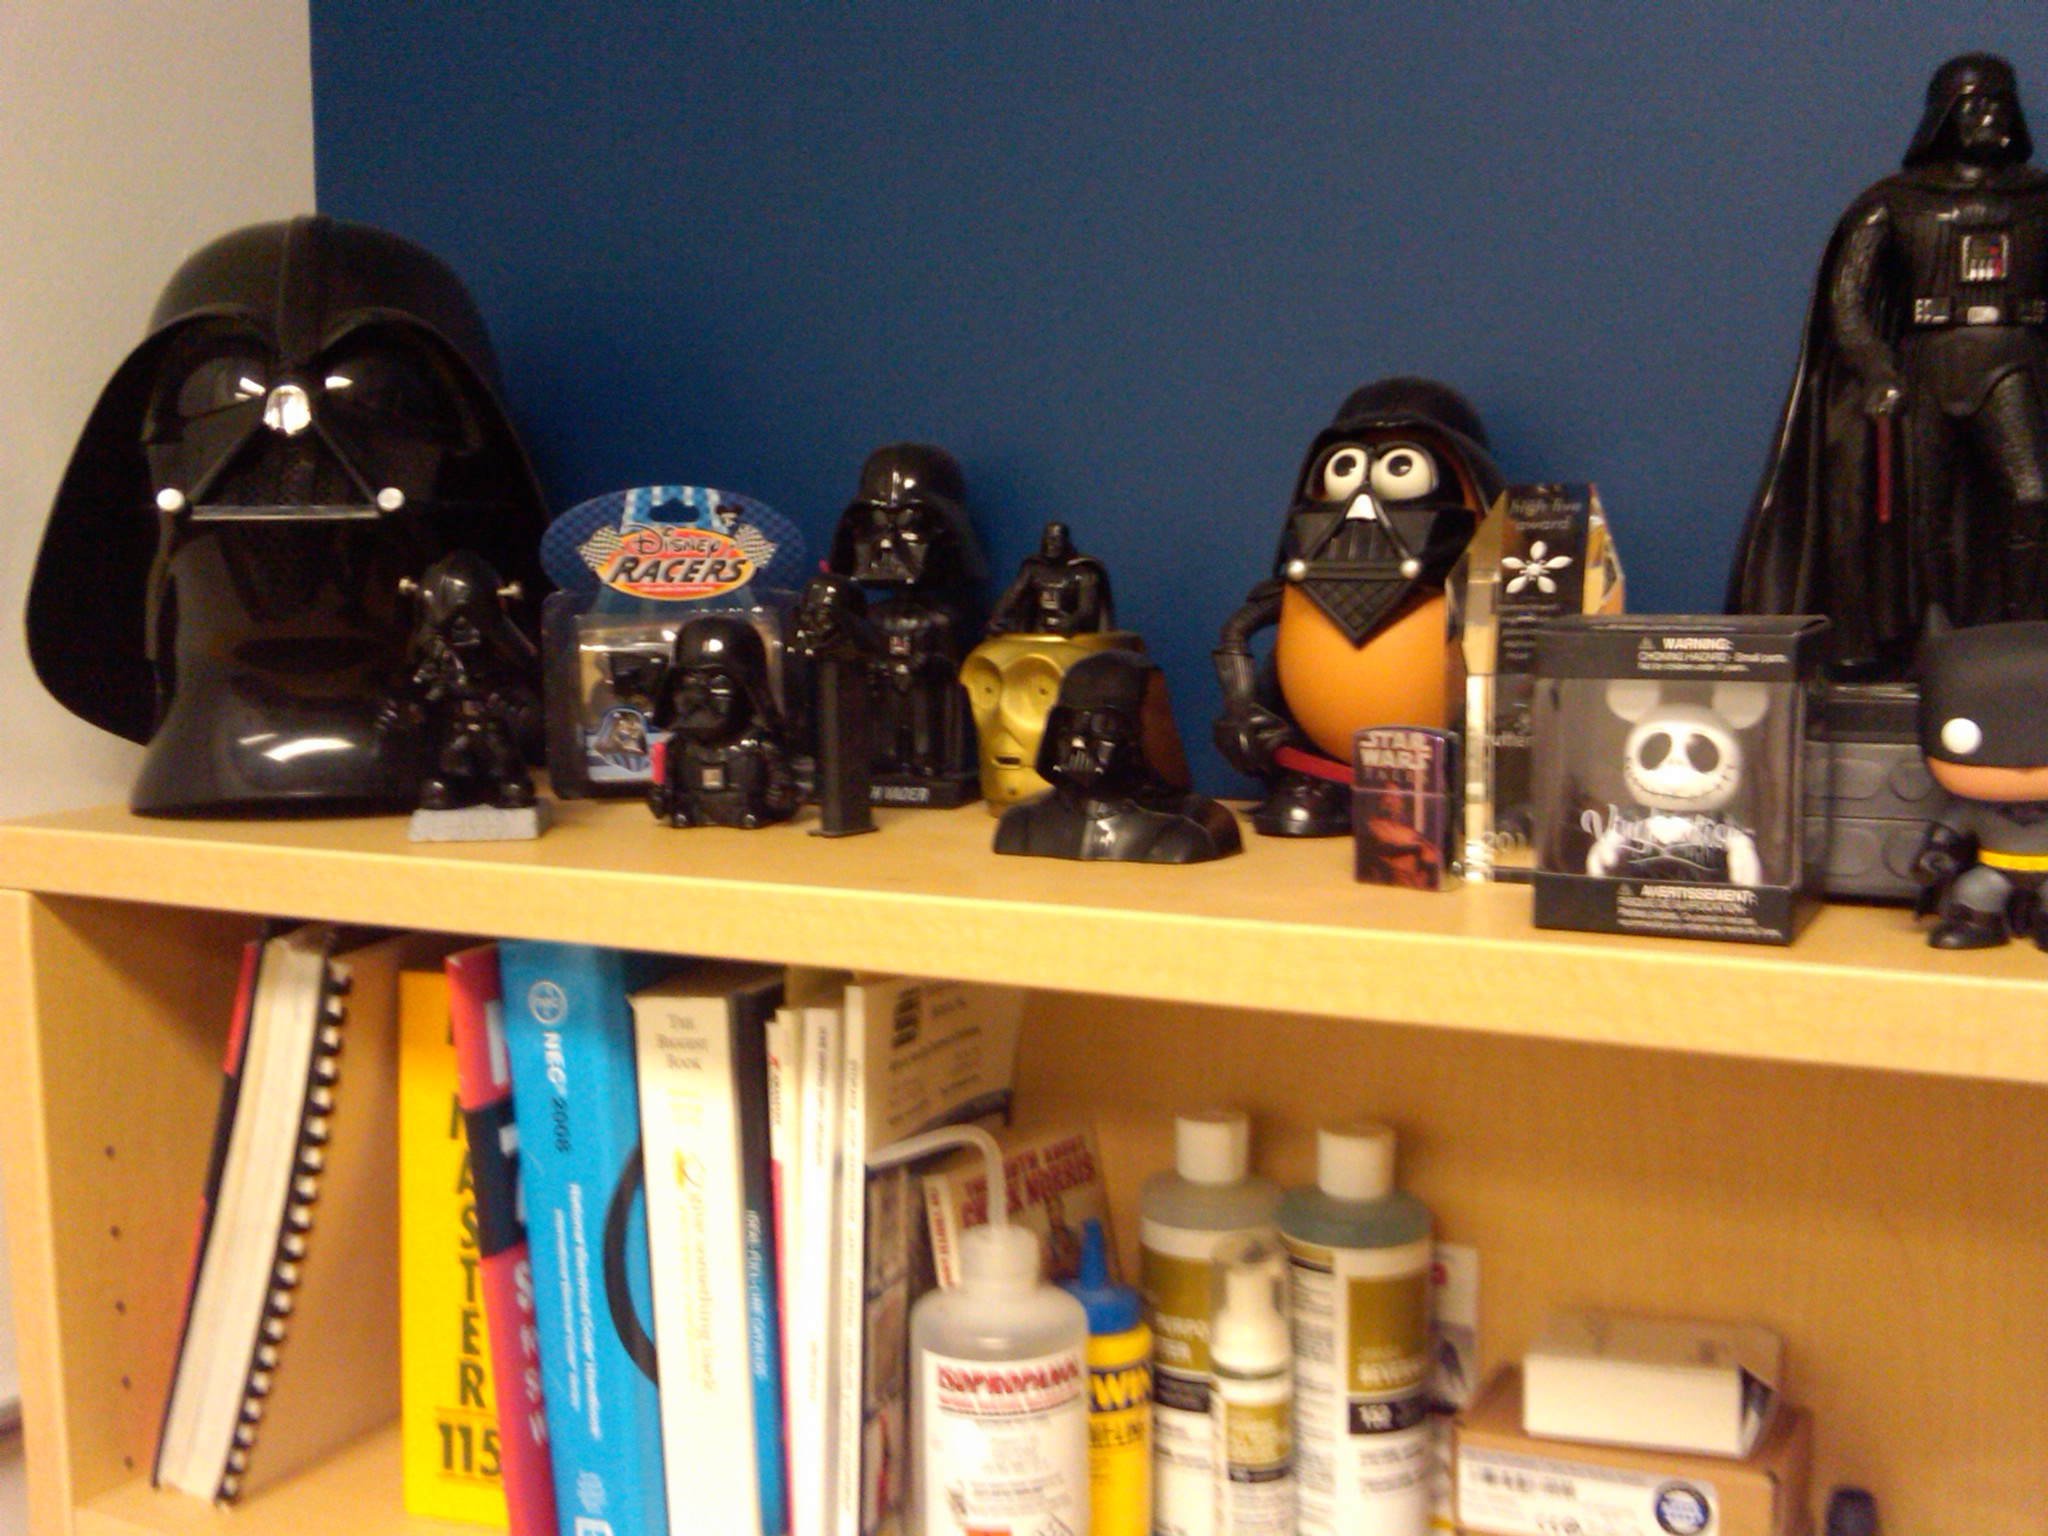 My office toy collection